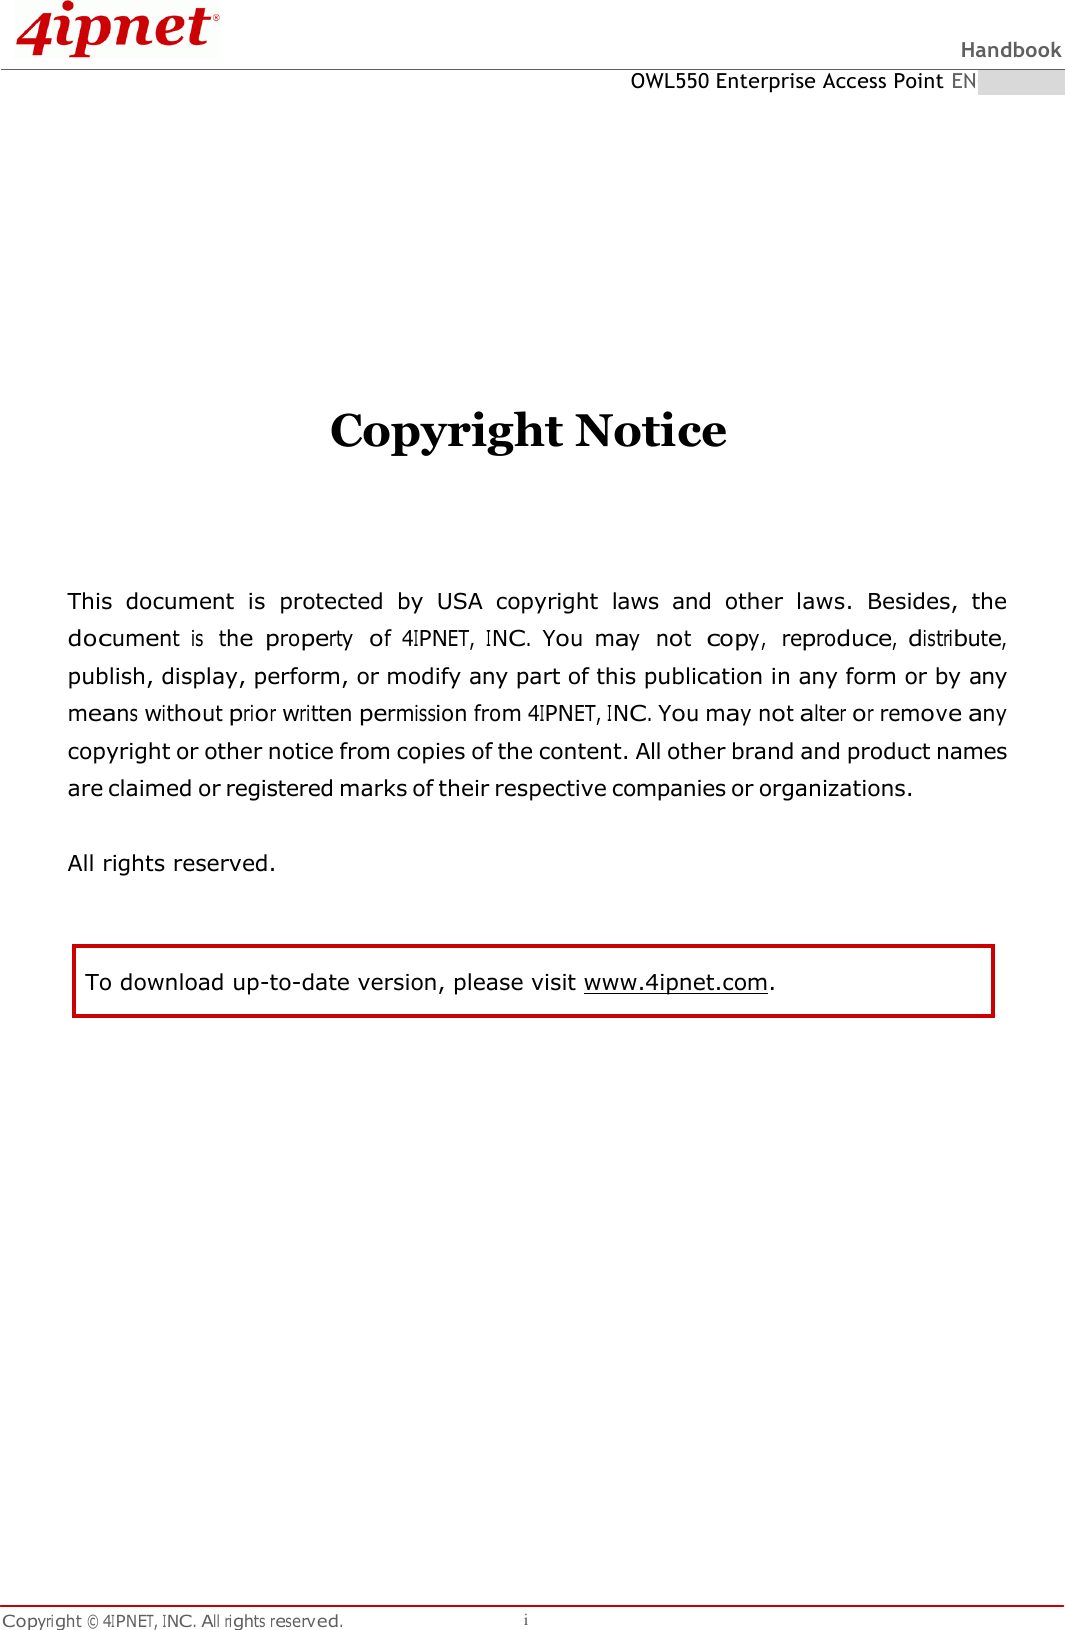 Handbook OWL550 Enterprise Access Point ENGLISH Copyright © 4IPNET, INC. All rights reserved. i   To download up-to-date version, please visit www.4ipnet.com.             Copyright Notice   This  document  is  protected  by  USA  copyright  laws  and  other  laws.  Besides,  the document is  the property  of 4IPNET, INC. You may  not  copy,  reproduce, distribute, publish, display, perform, or modify any part of this publication in any form or by any means without prior written permission from 4IPNET, INC. You may not alter or remove any copyright or other notice from copies of the content. All other brand and product names are claimed or registered marks of their respective companies or organizations.  All rights reserved.    